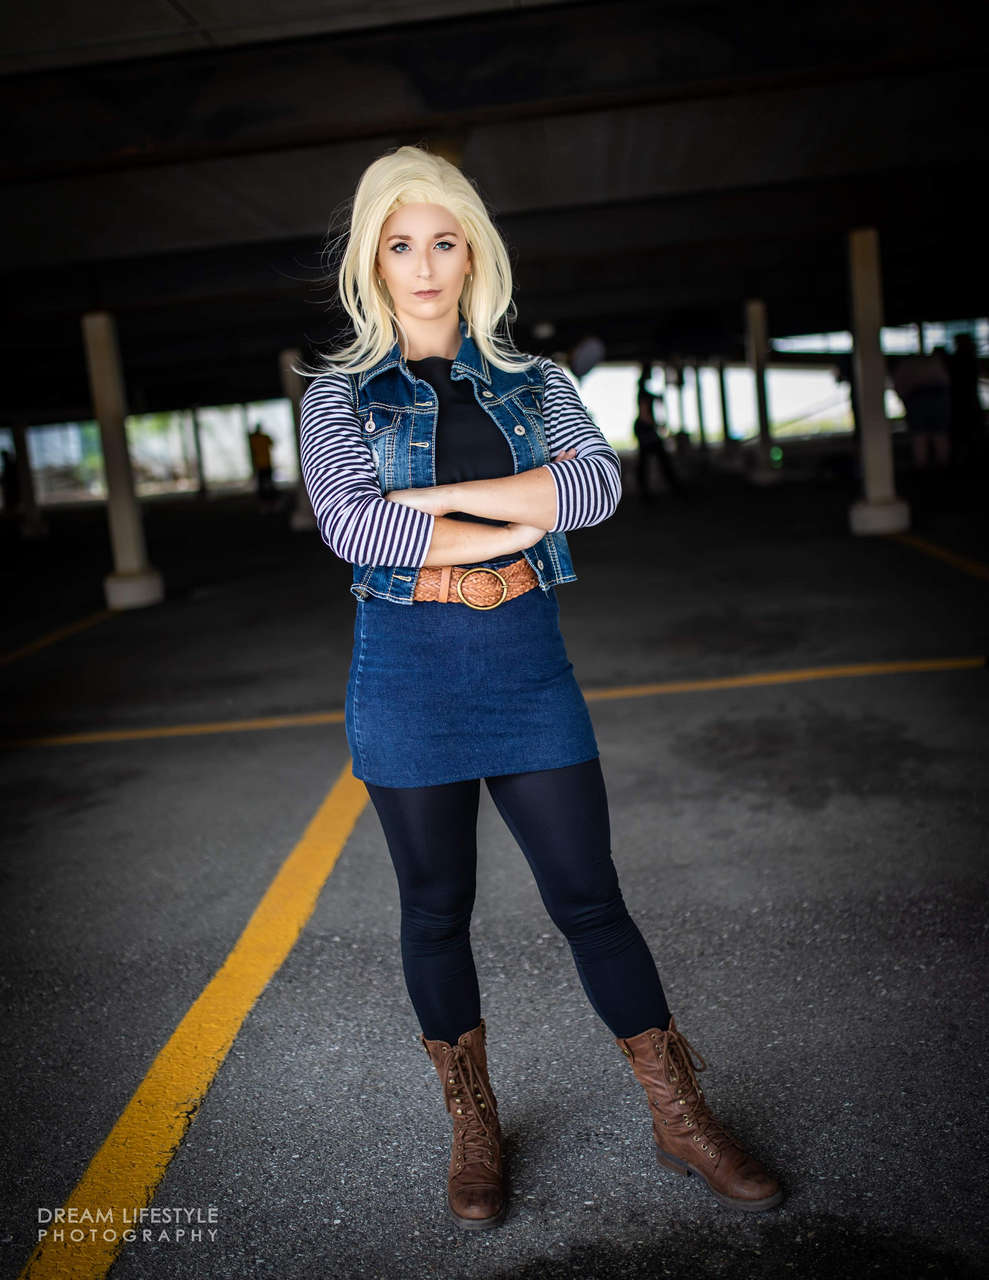 Self Android 18 From Anime North Toront